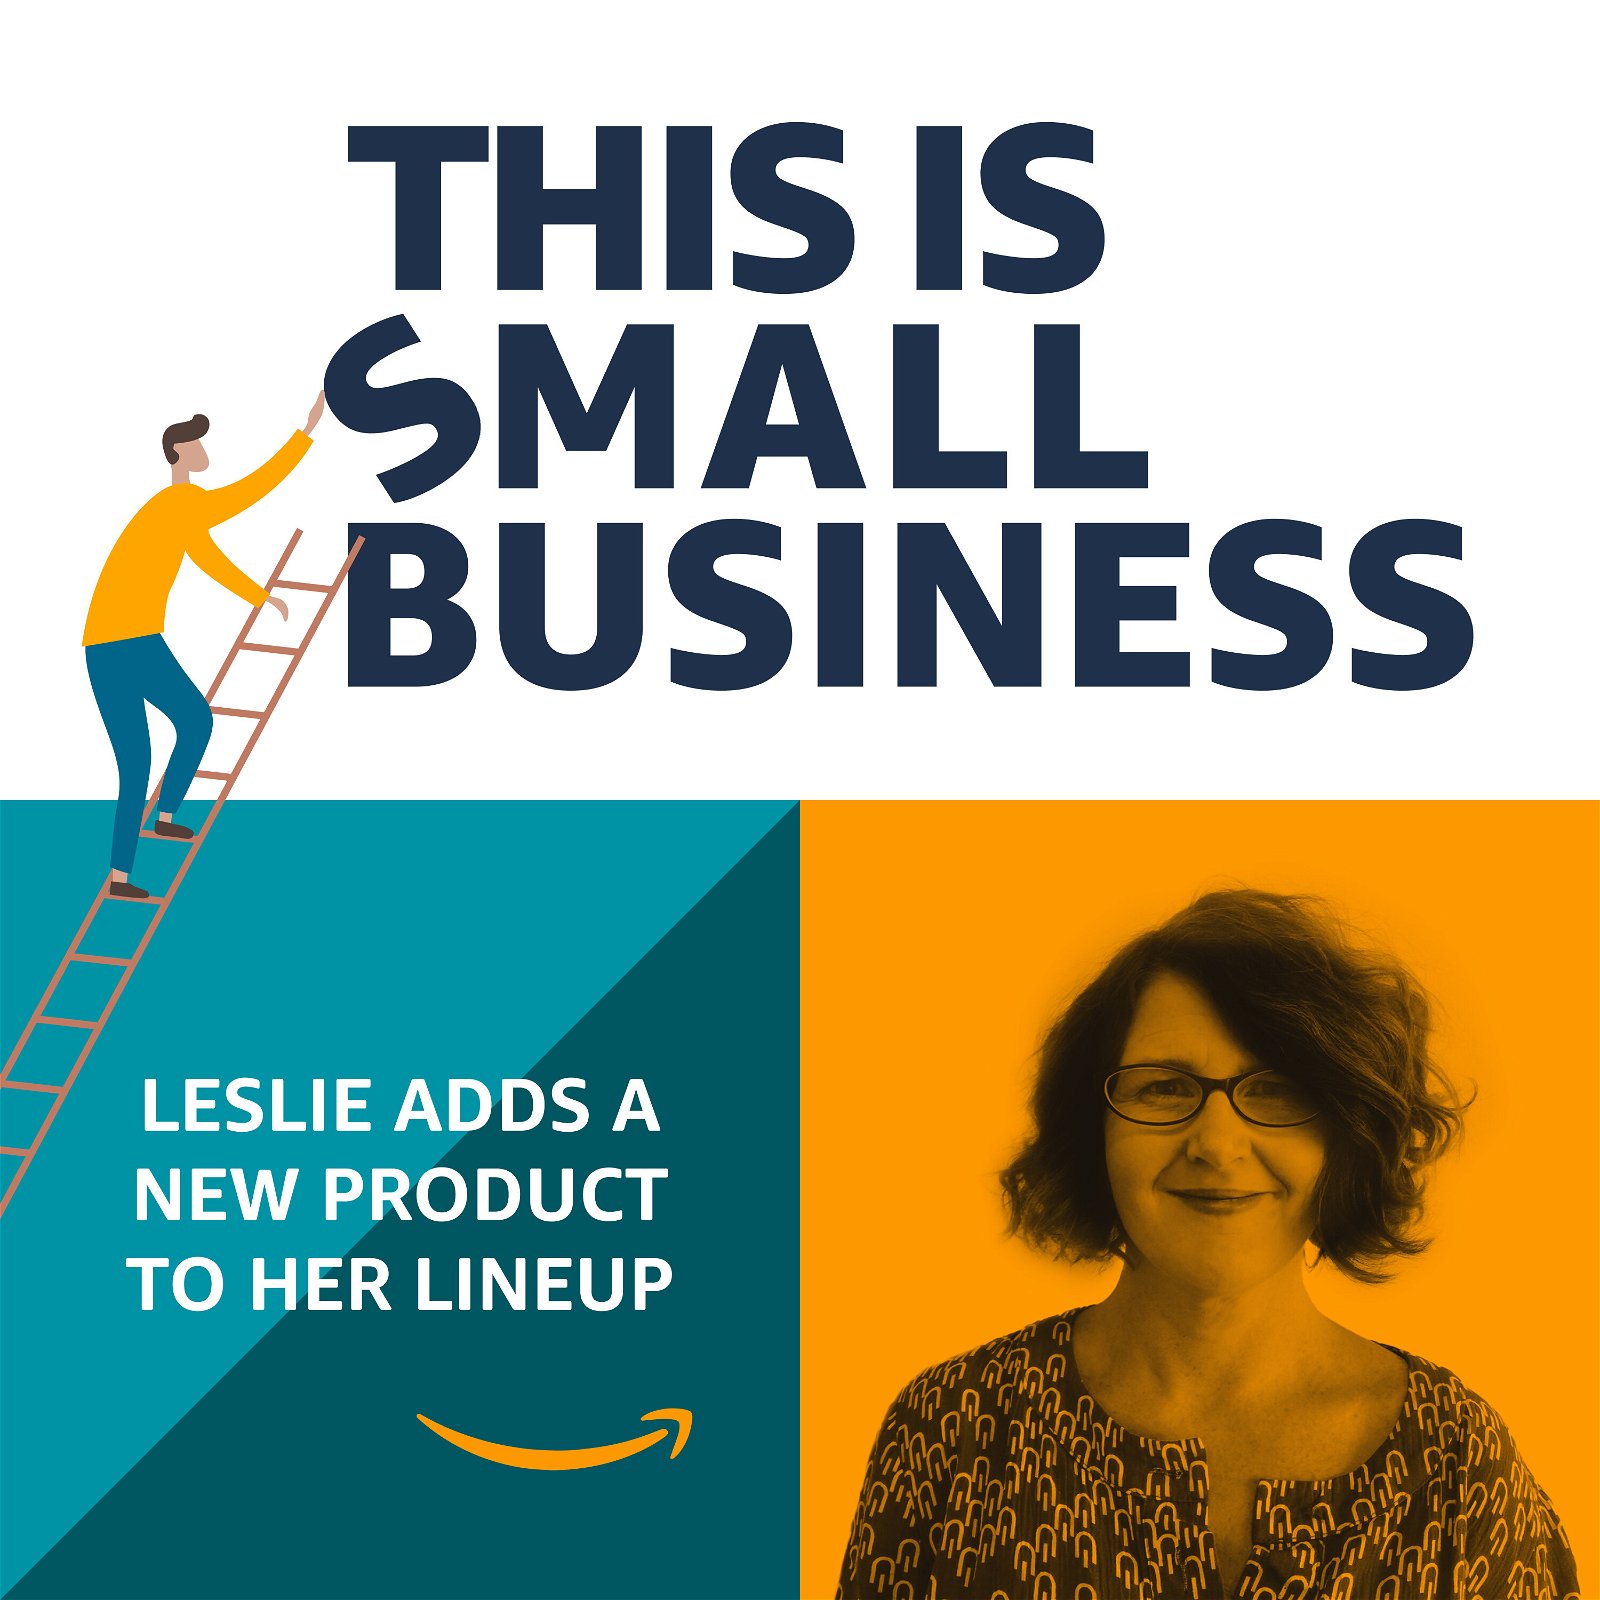 Leslie Adds a New Product to Her Lineup